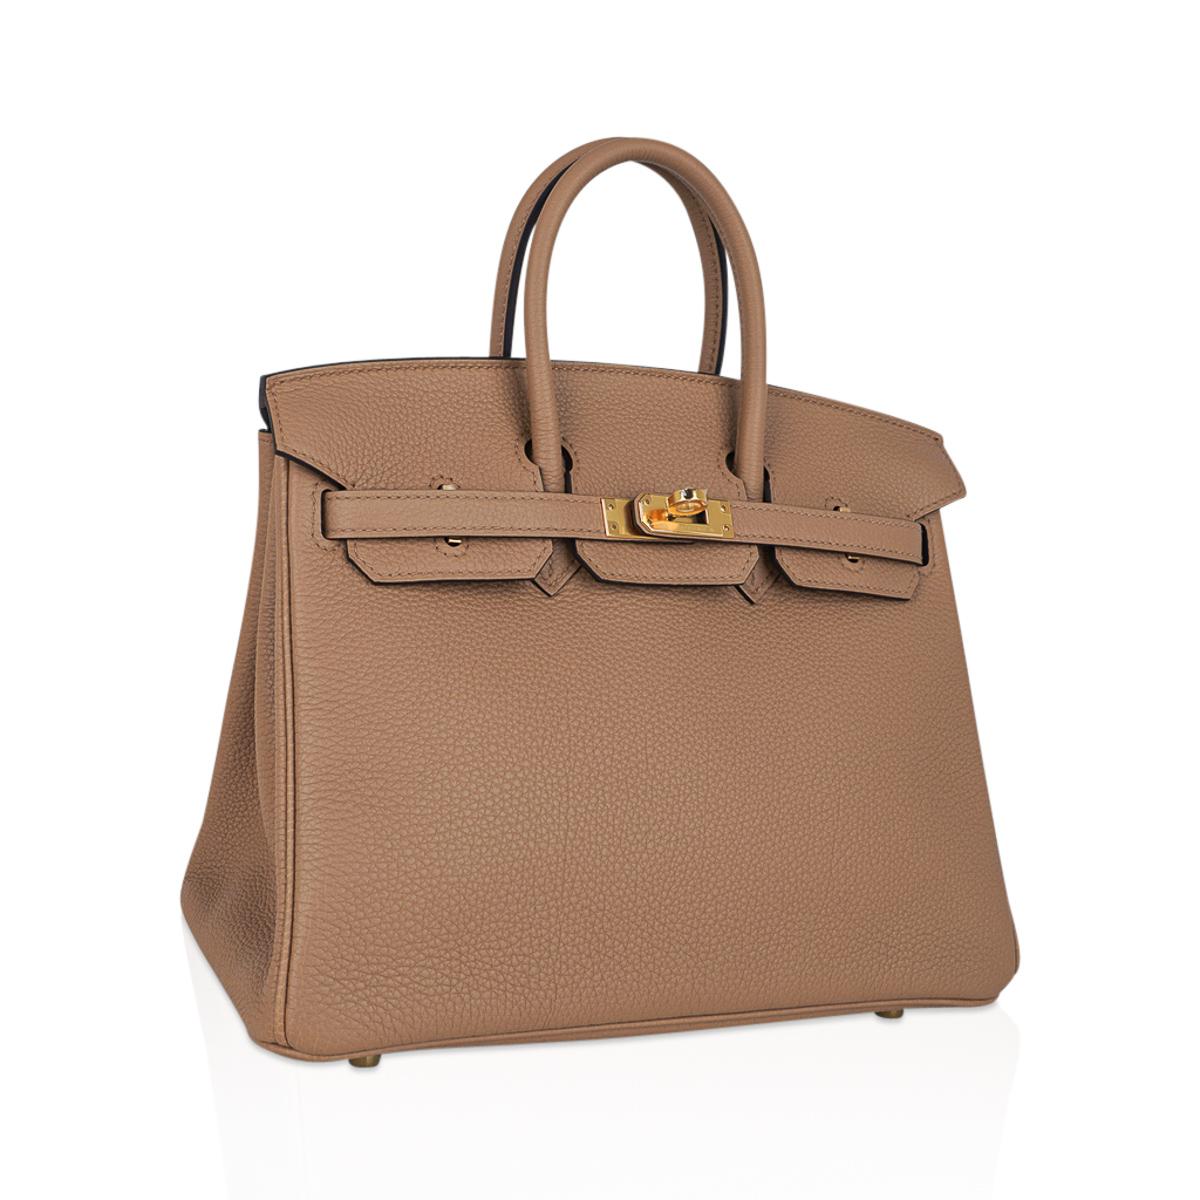 Mightychic offers an Hermes Birkin 25 bag featured in warm Chai.
This neutral Hermes Birkin is the all time perfect neutral statement.
Softer and creamier than Gold, this fabulous colour moves easily with any piece in your wardrobe.
Lush Togo